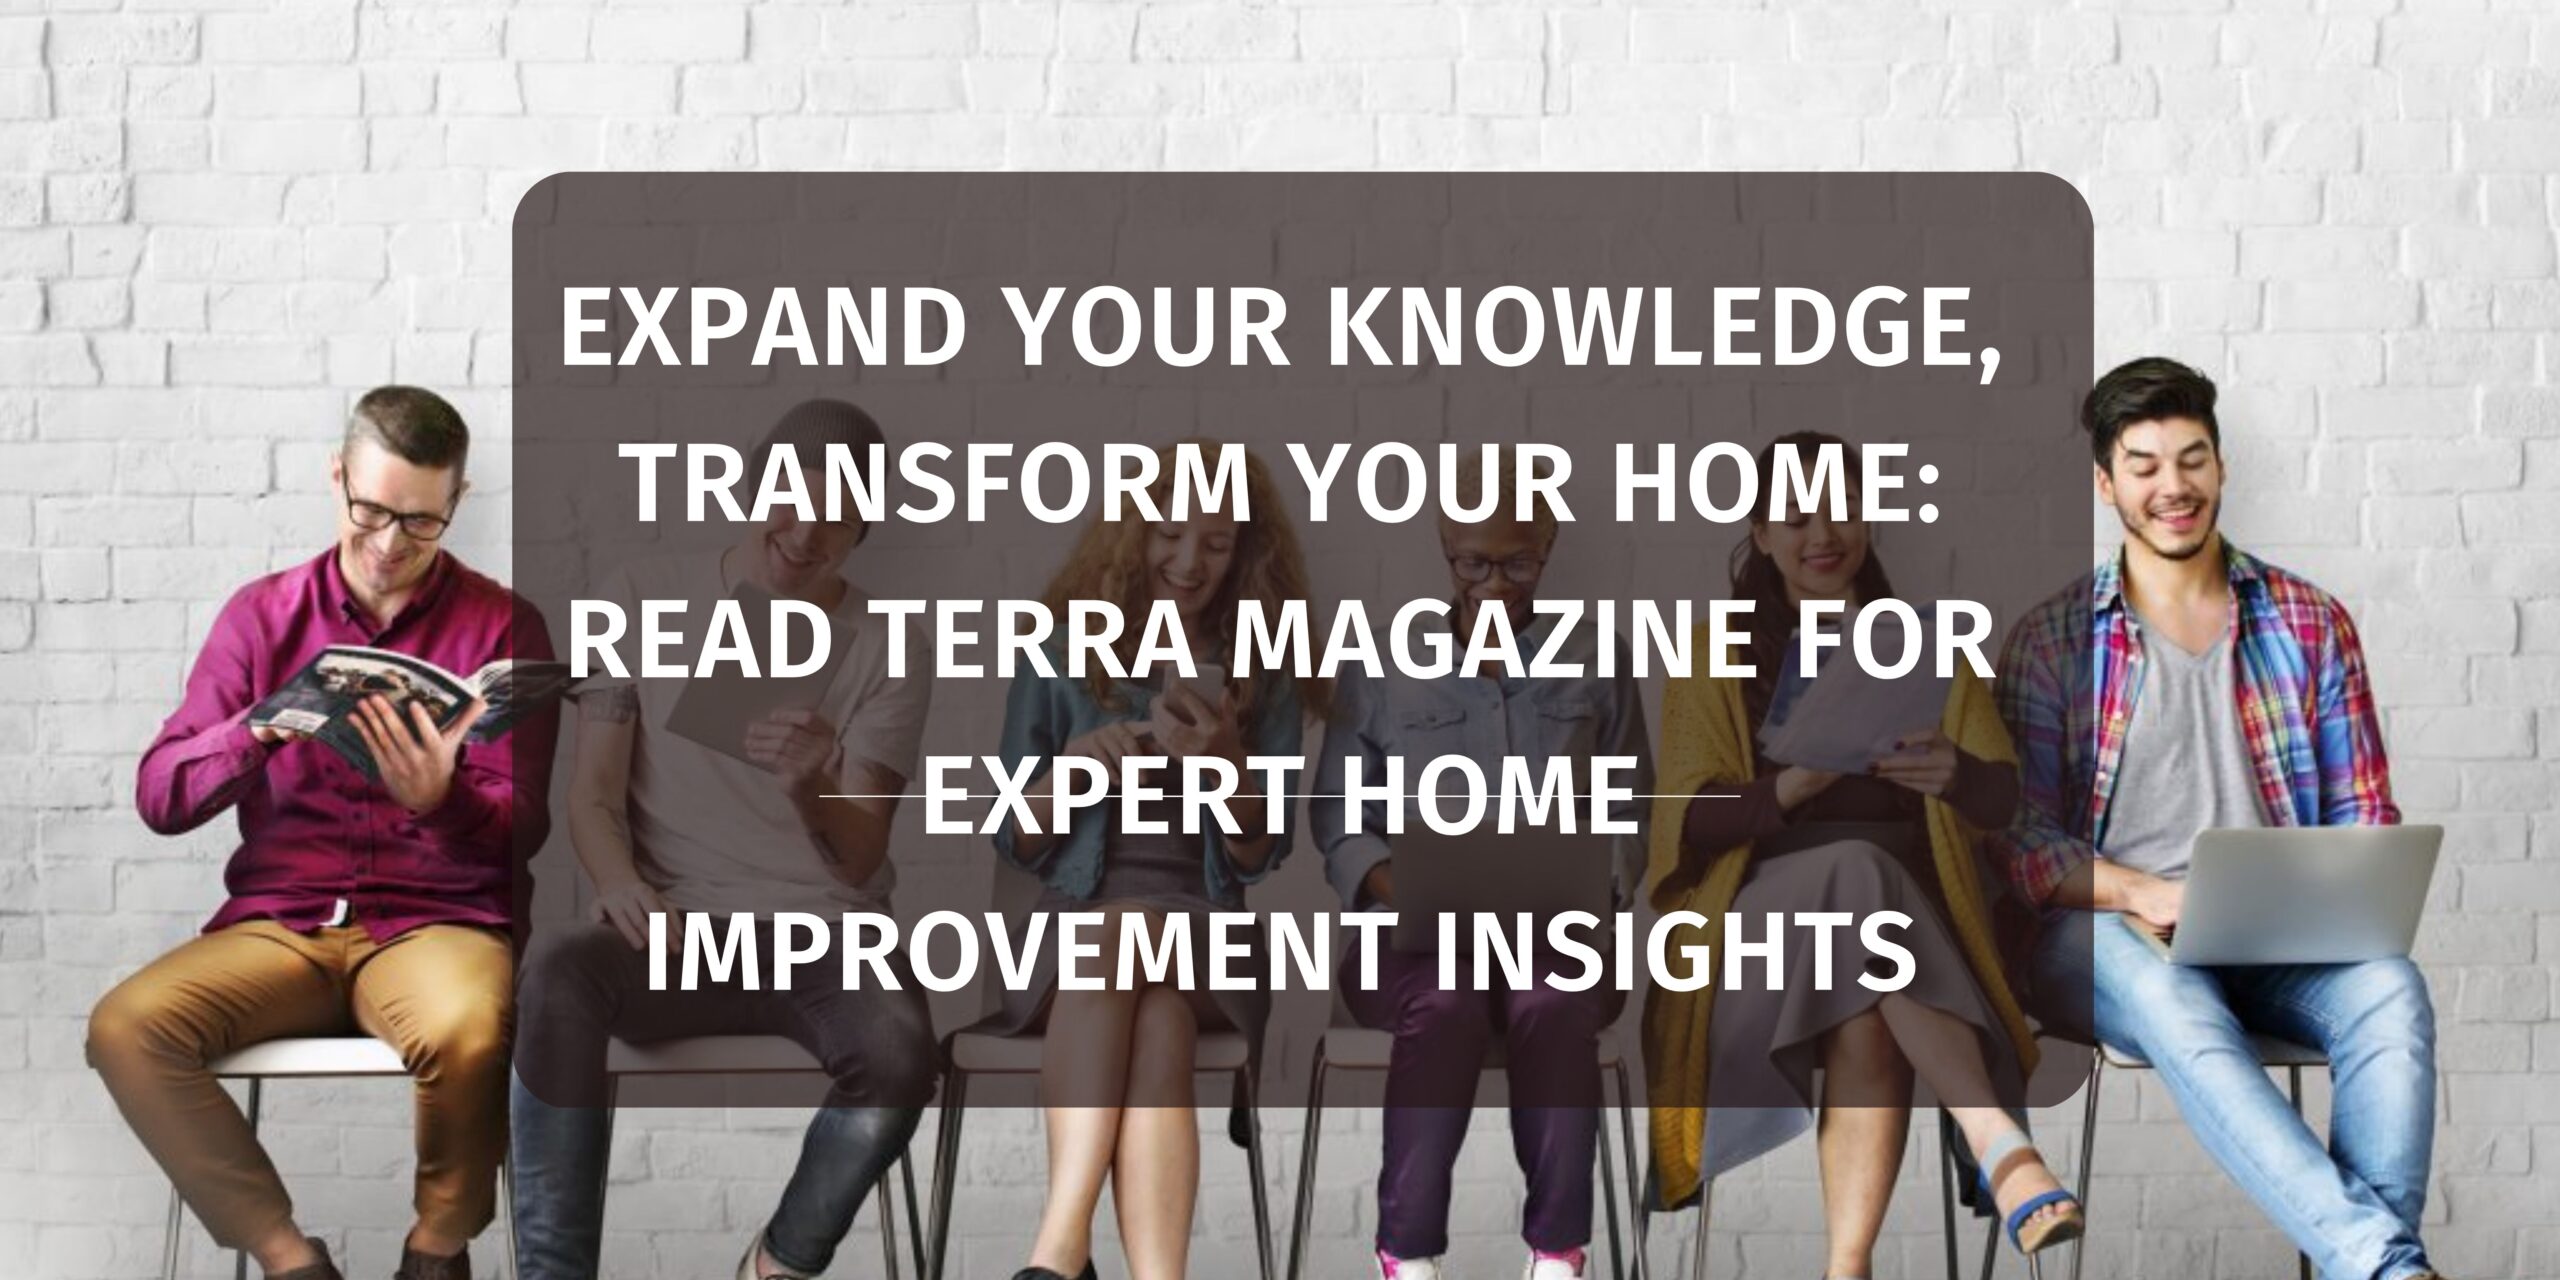 Terra Magazine's Extensive Coverage of Home Improvement and Repair Topics: Everything You Need to Know